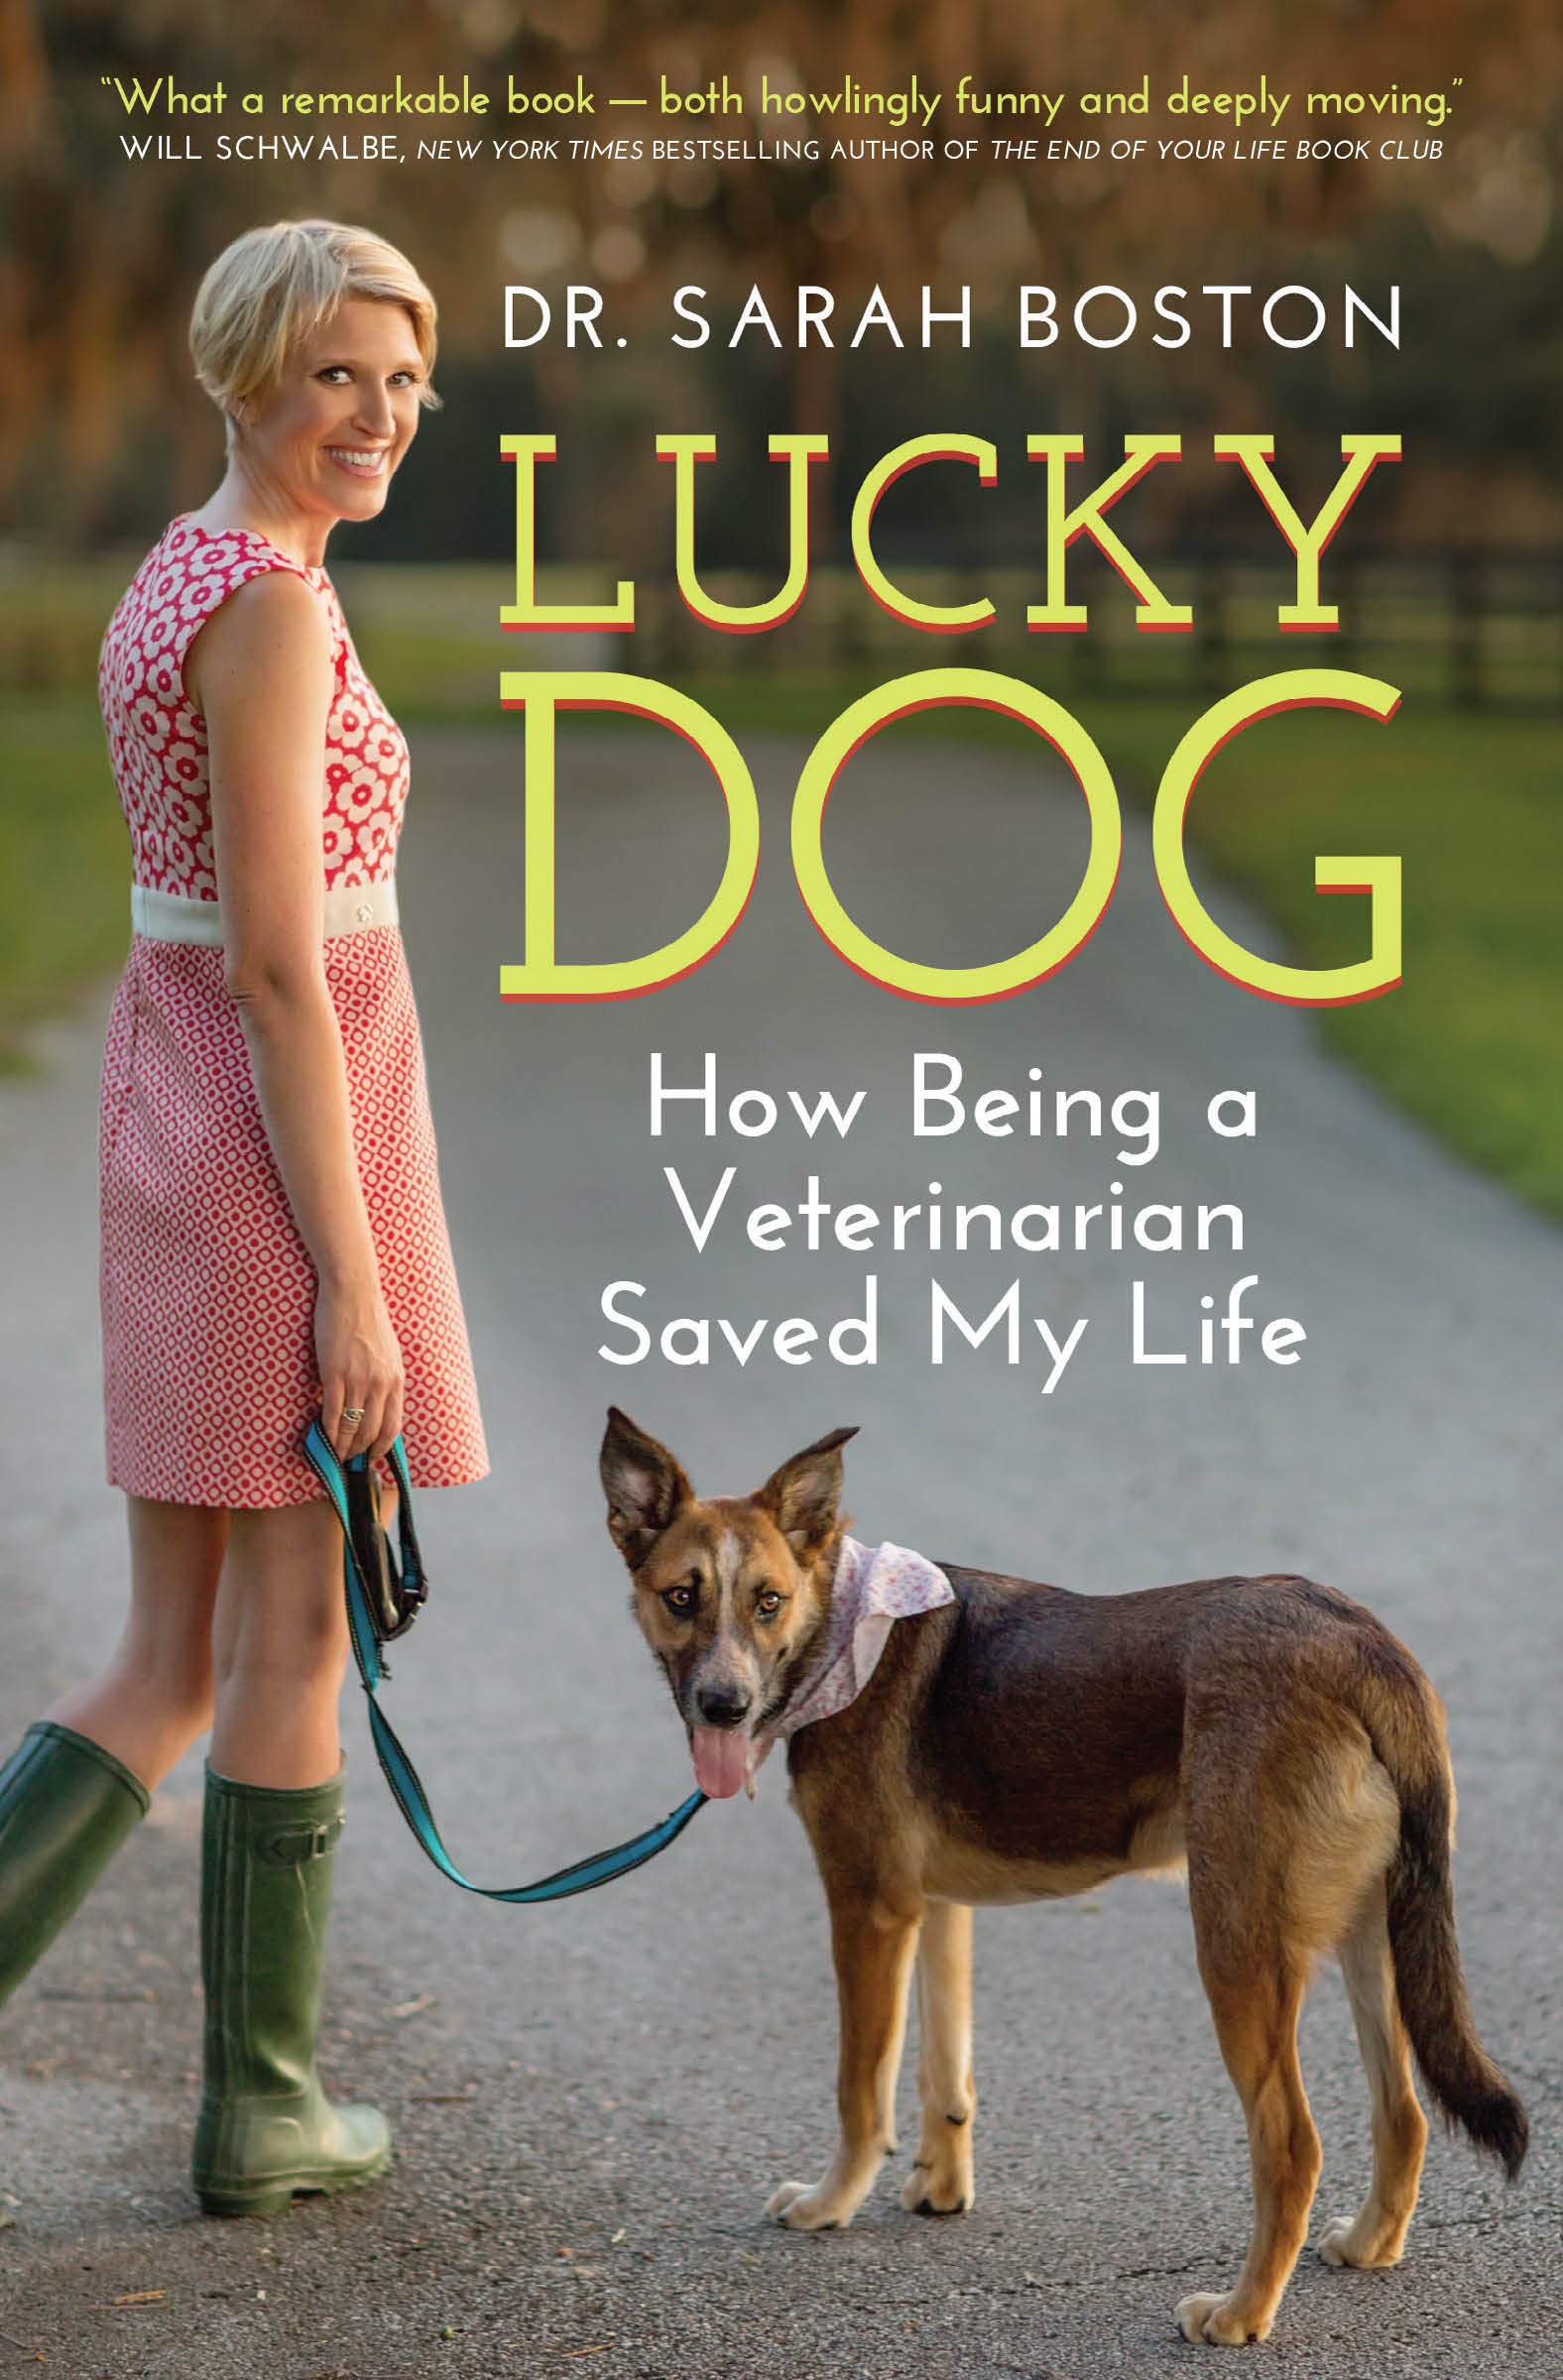 LUCKY DOG HOW BEING A VETERINARIAN SAVED MY LIFE DR SARAH BOSTON Copyright - photo 1